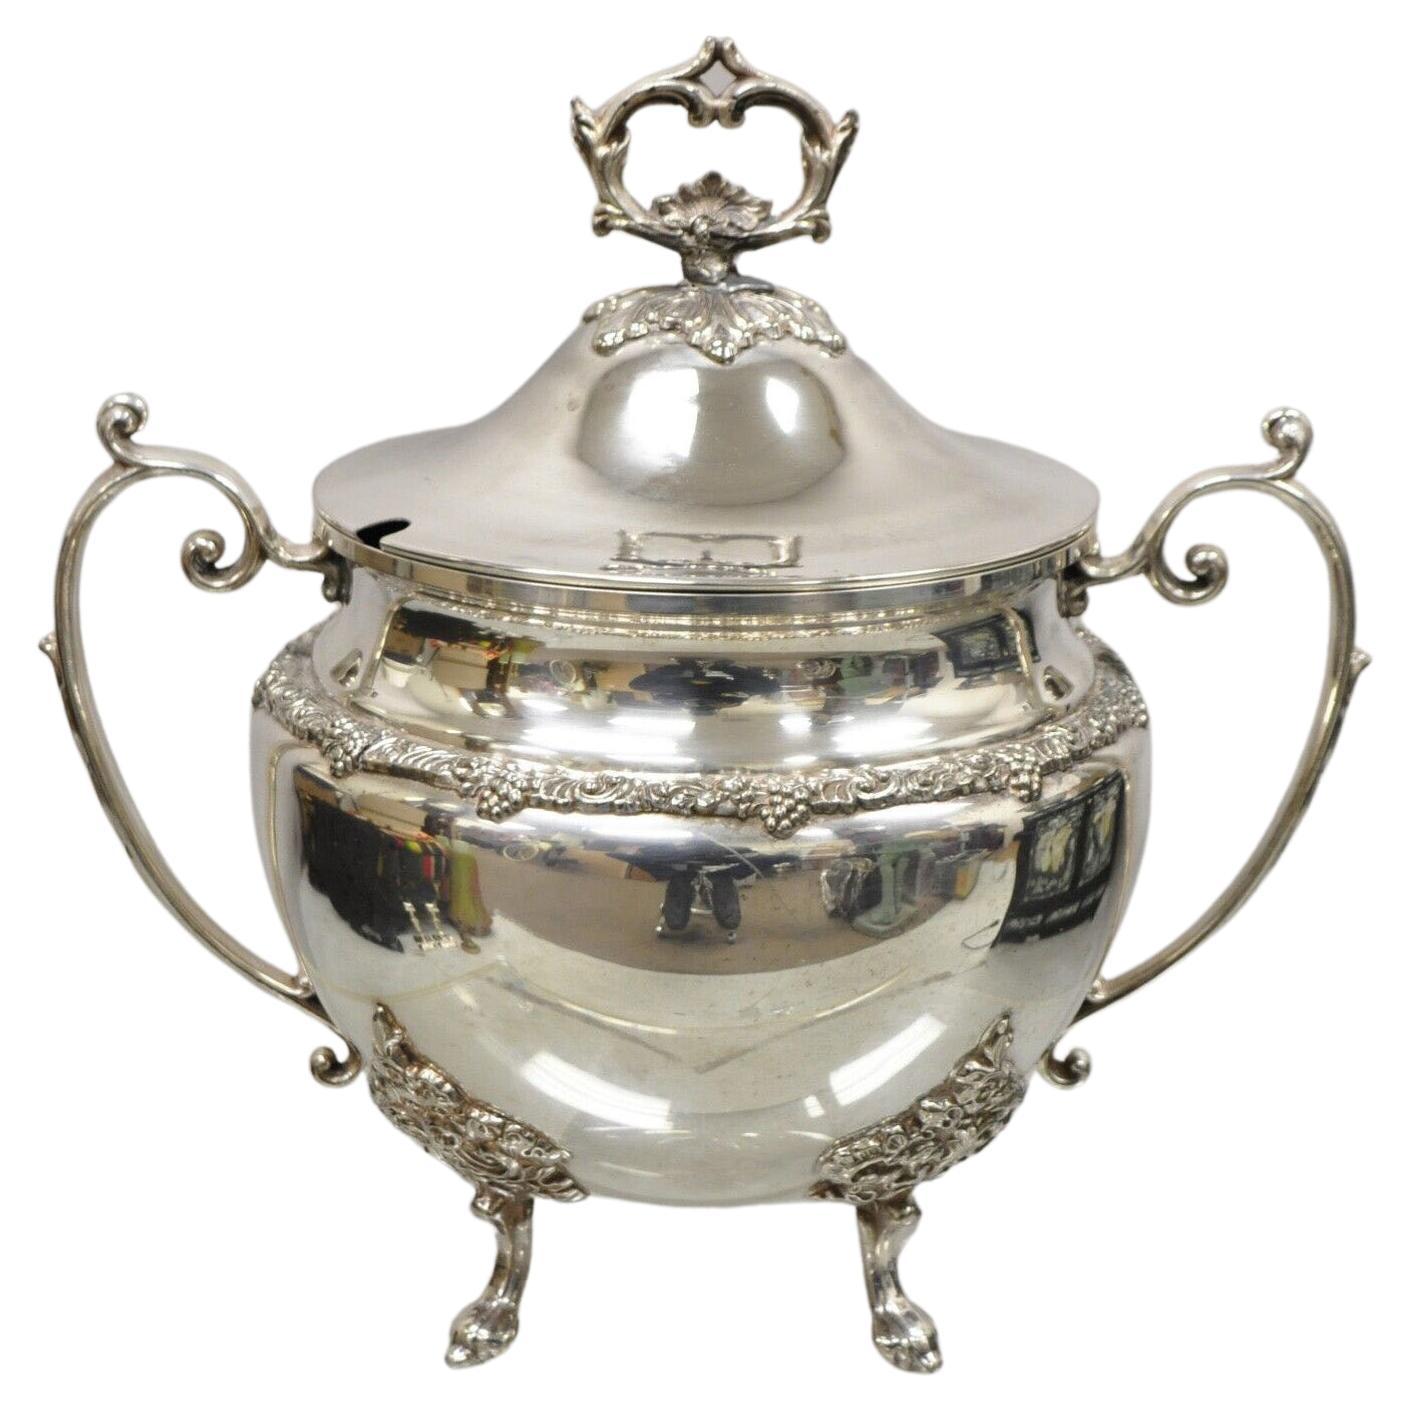 Vintage Silver Plated Soup Tureen Serving Pot with Lid and Fancy Twin Handles